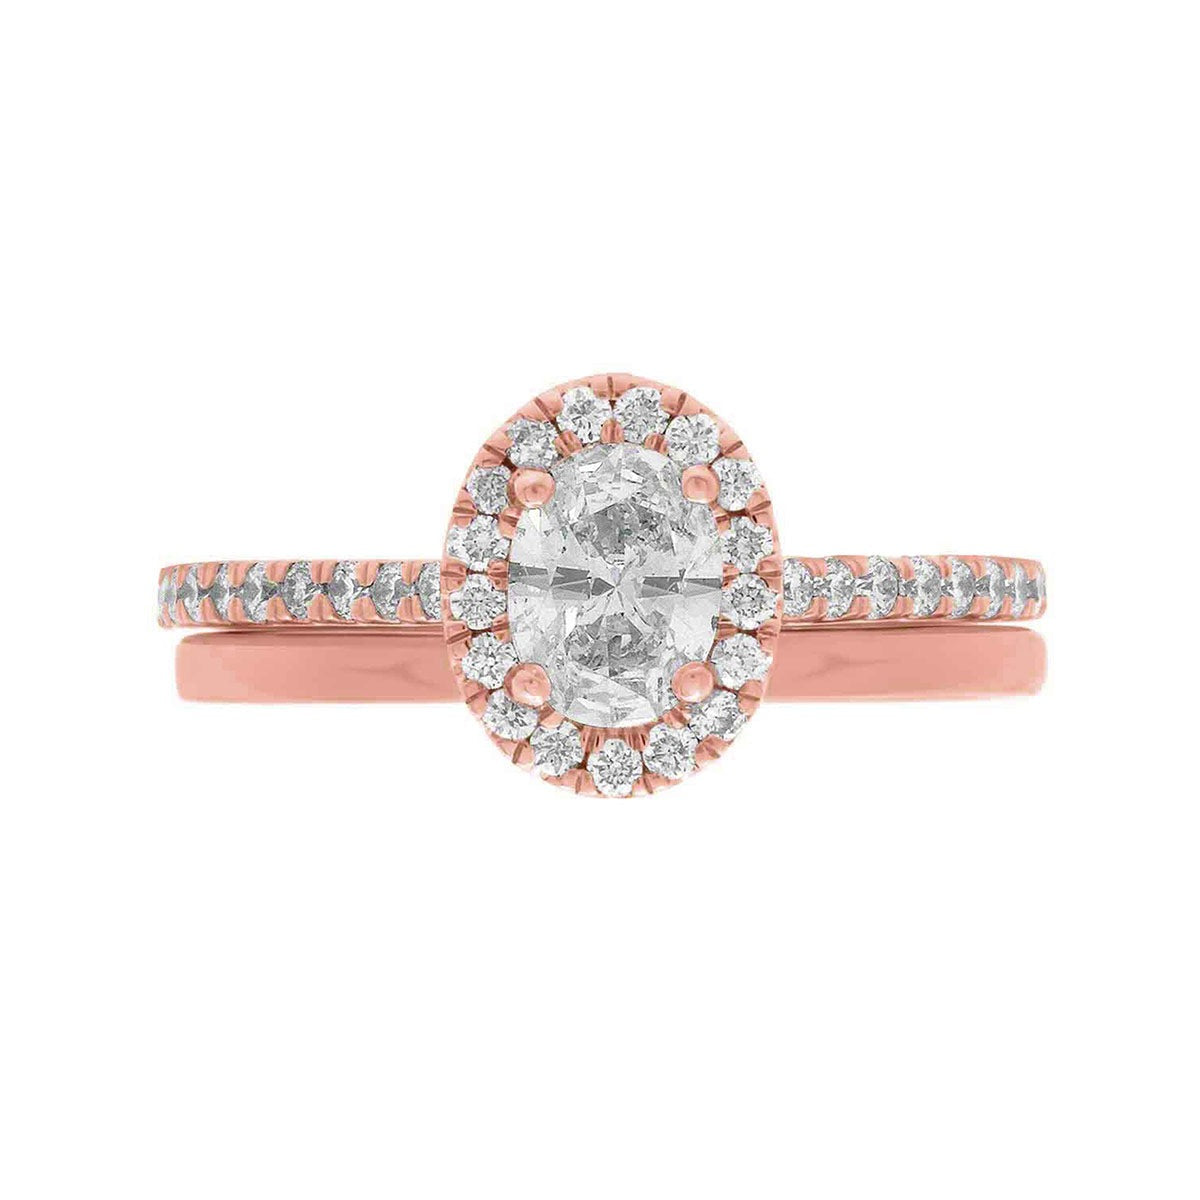 Oval Halo Engagement Ring made of rose gold pictured with a a matching plain wedding ring